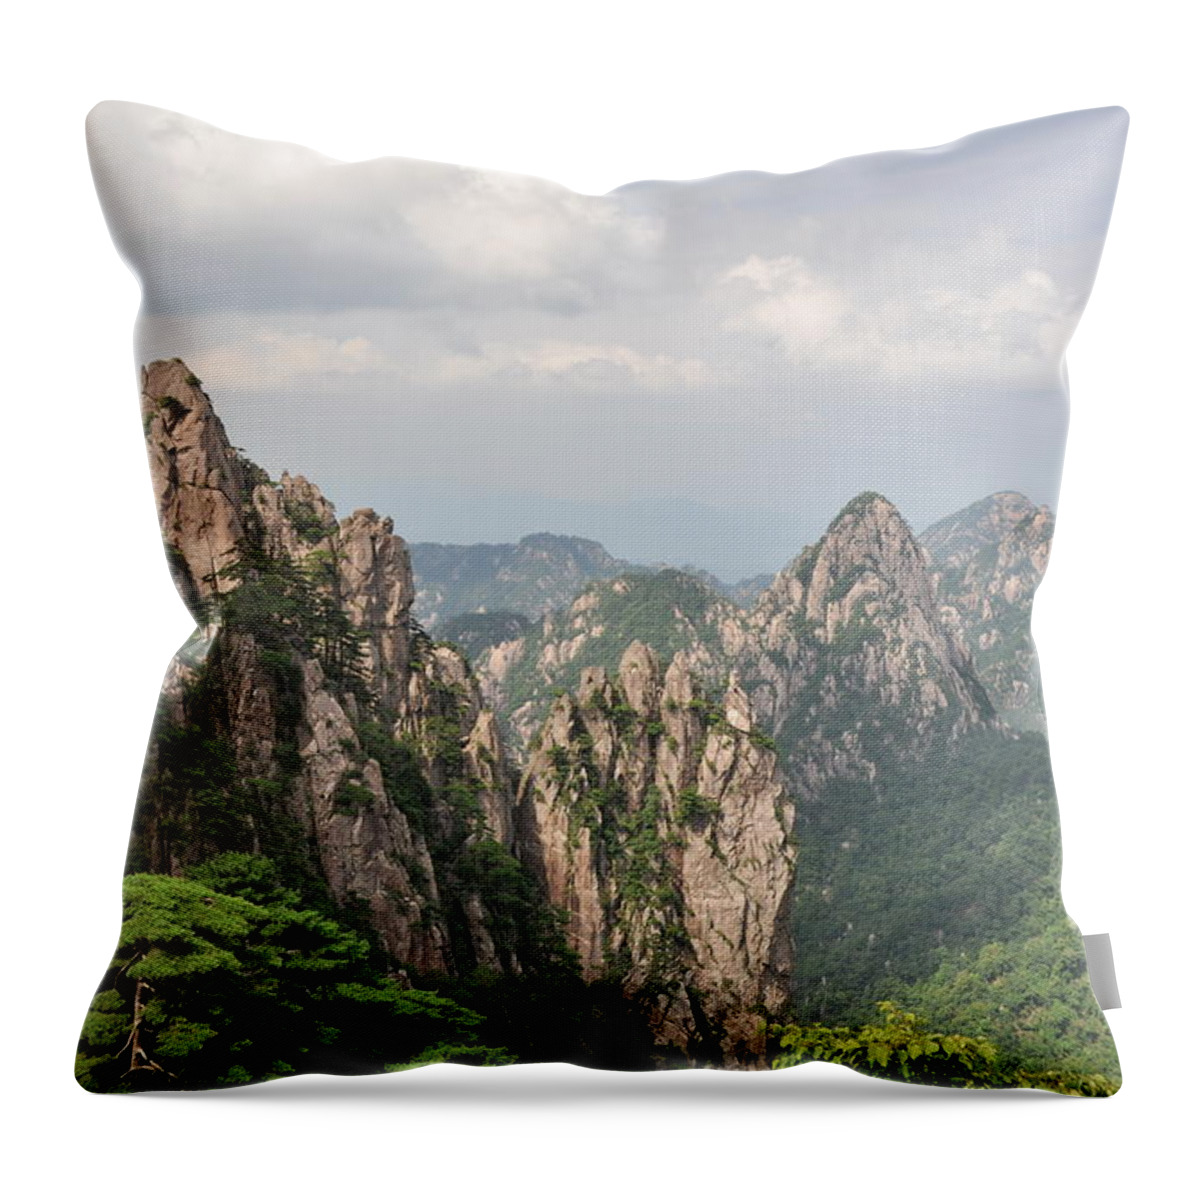 China Throw Pillow featuring the photograph Huangshan Granite 1 by Jason Chu